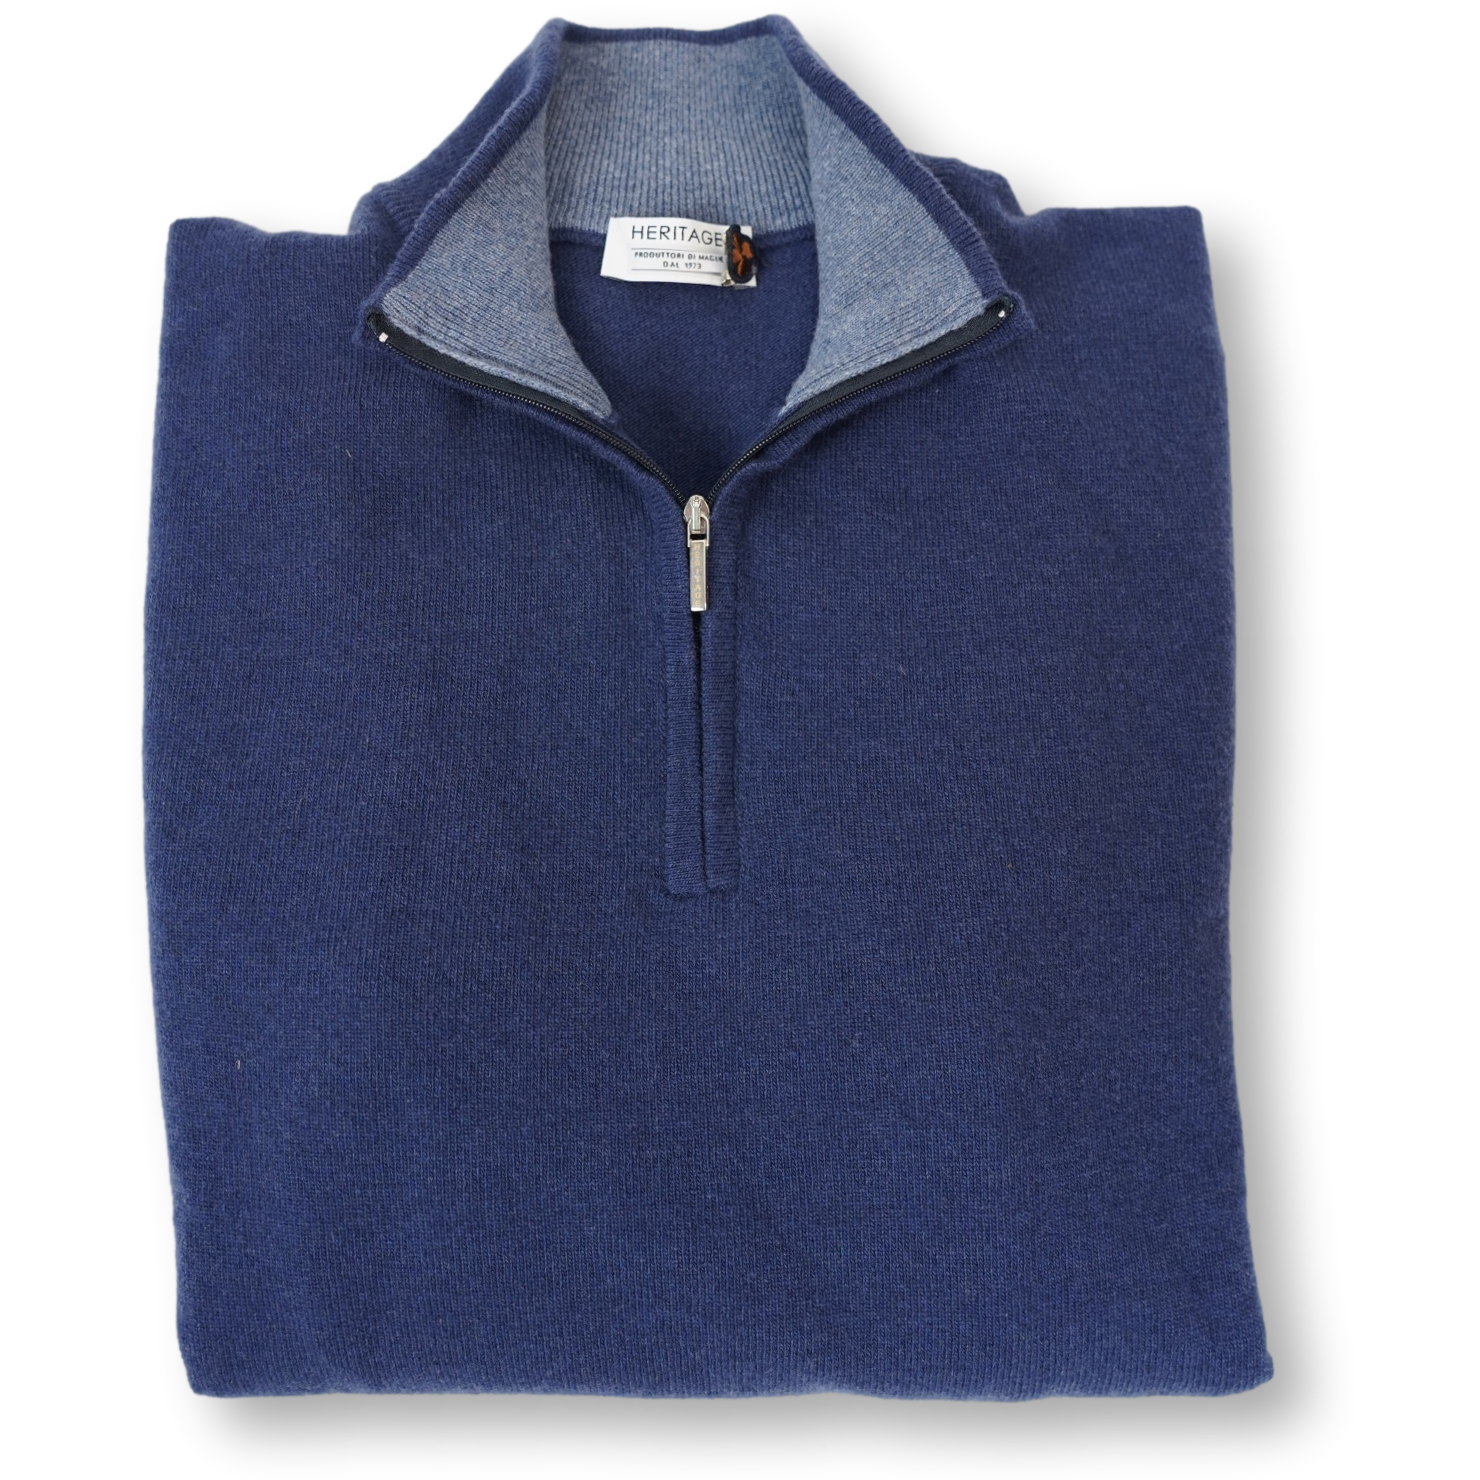 Heritage Wool and Cashmere Quarter Zip Sweater